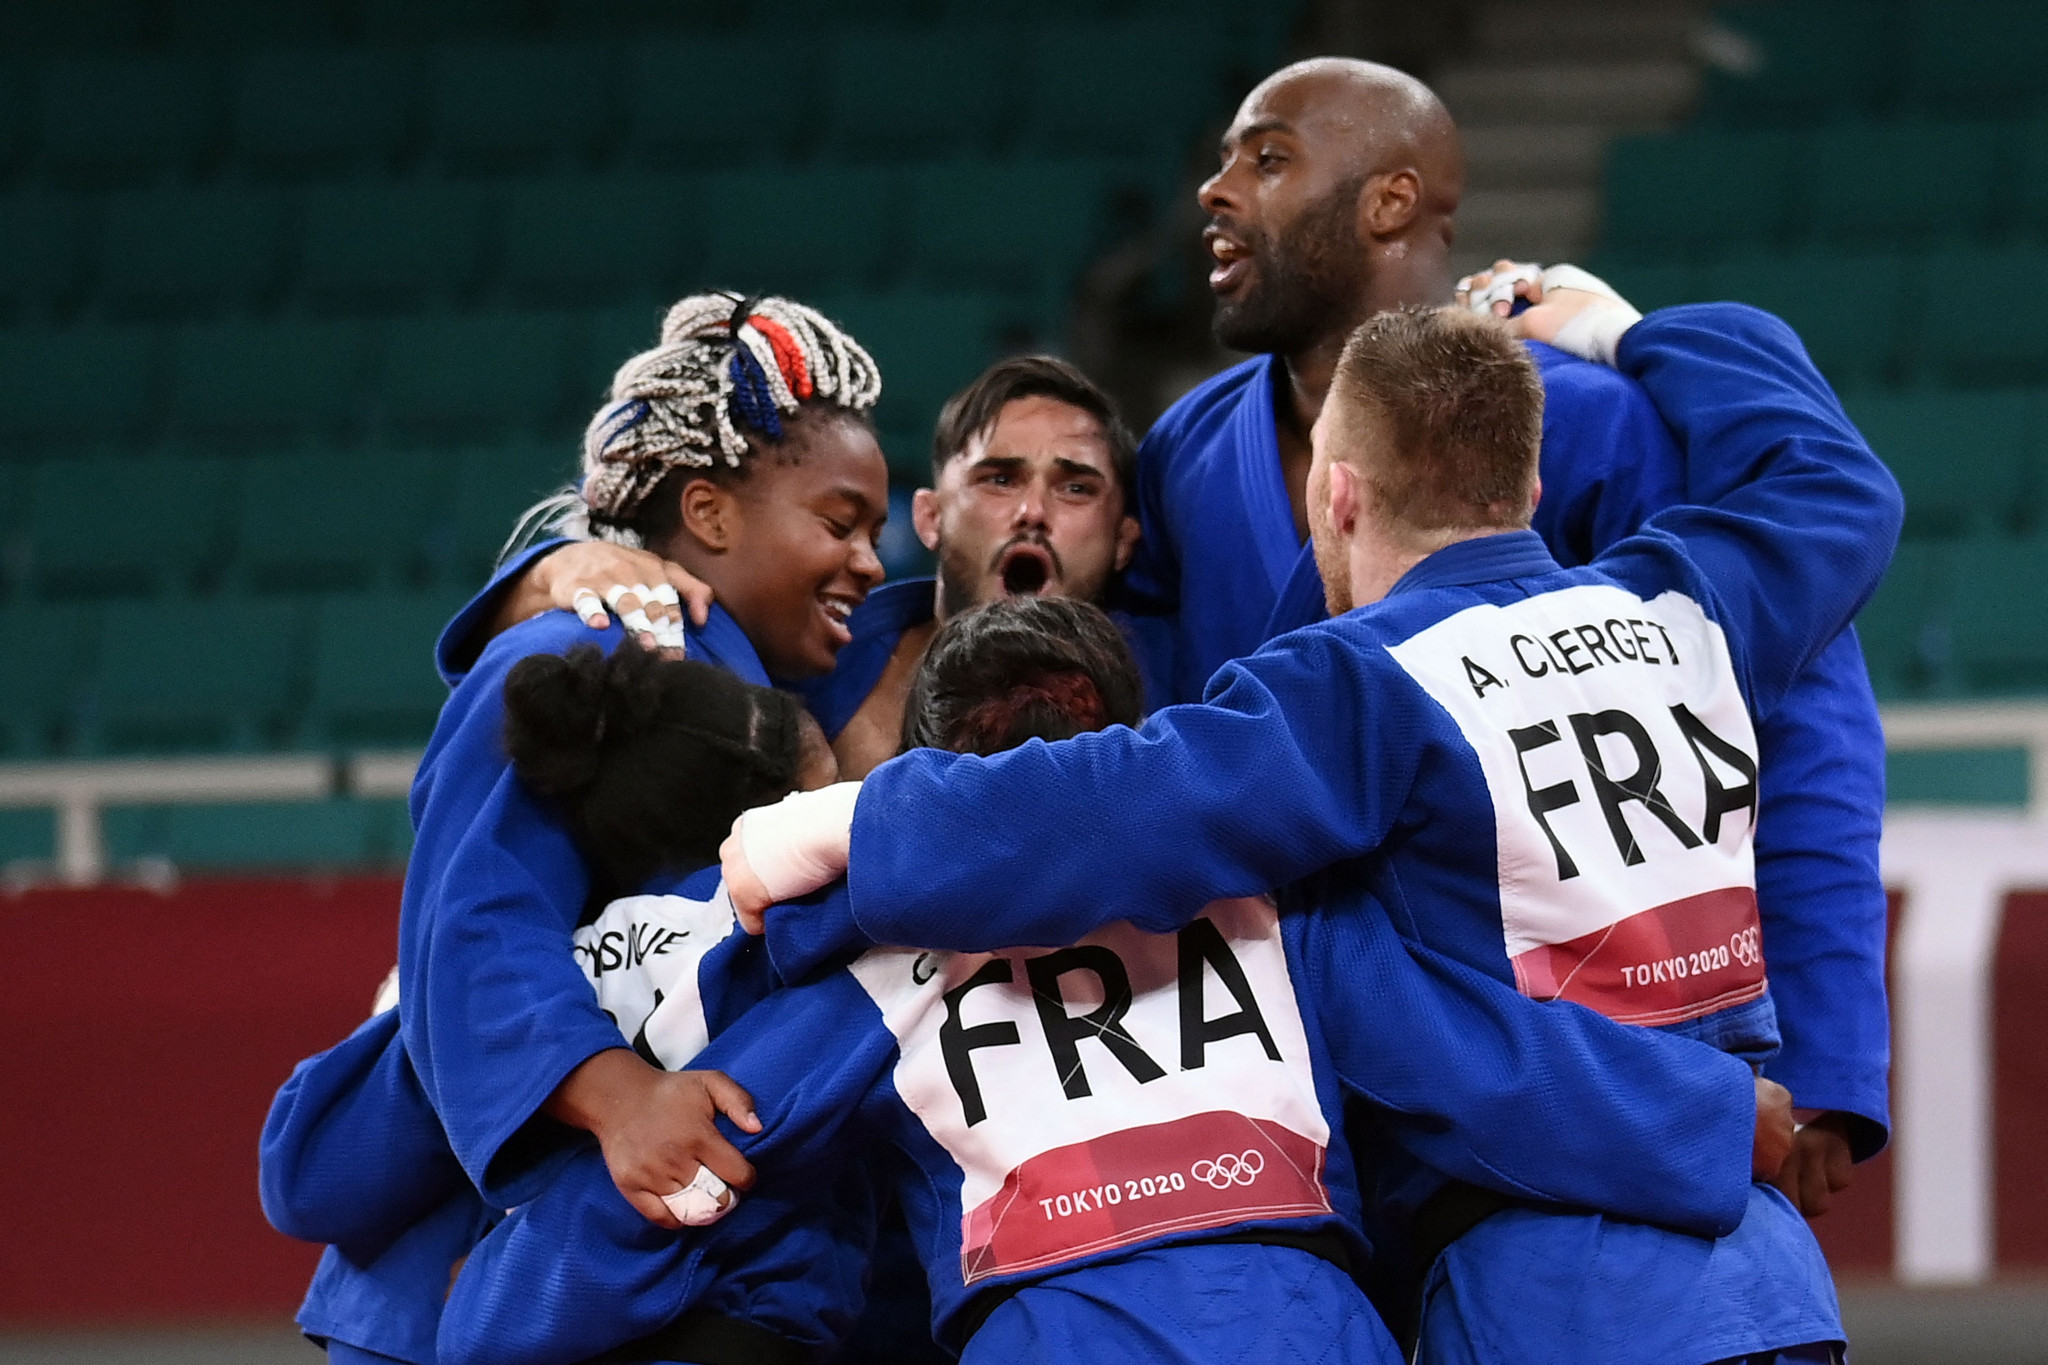 France Judo distributes thousands of Paris 2024 tickets for members